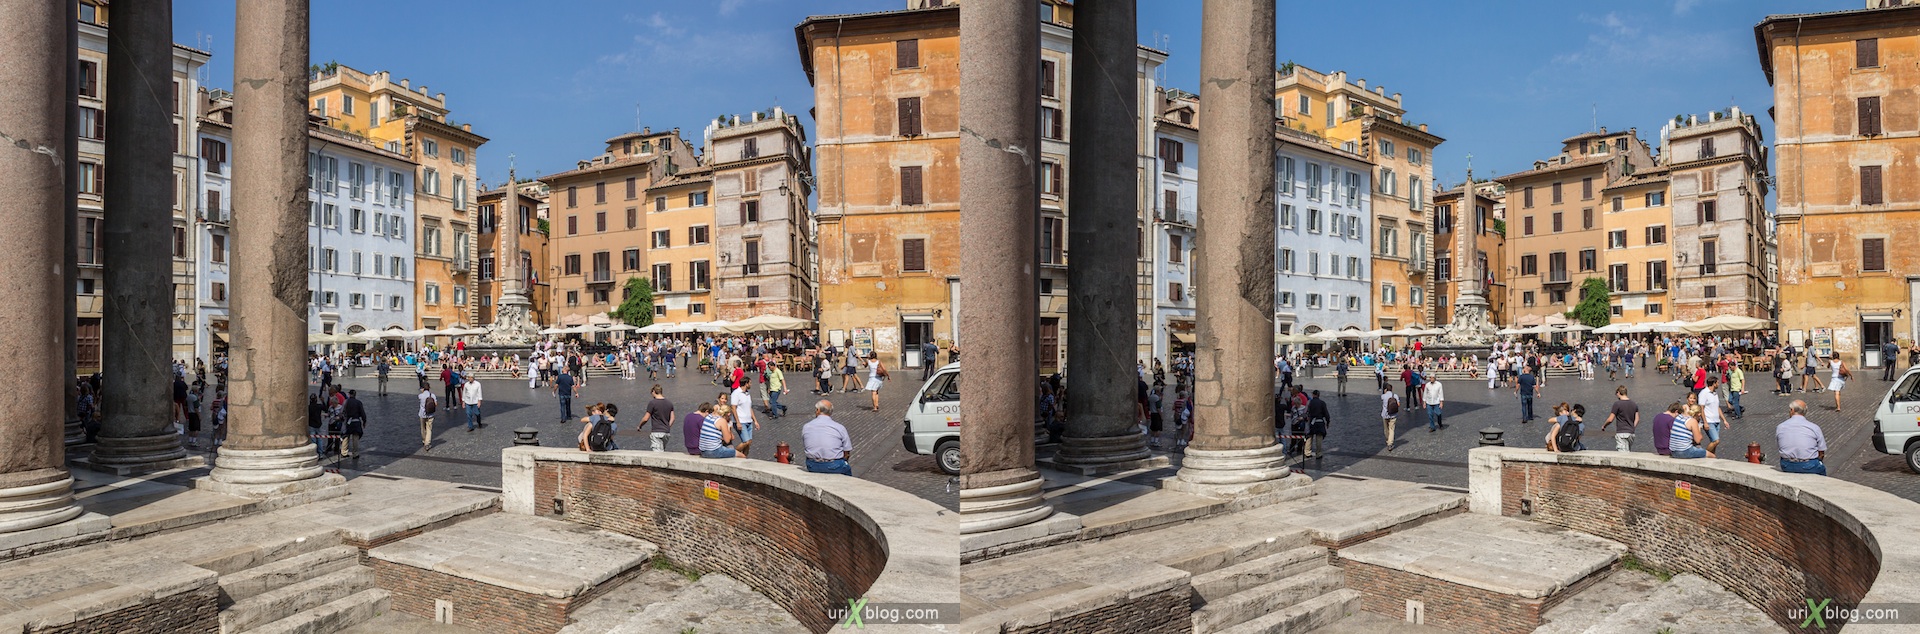 2012, Pantheon, della Rotonda square, Rome, Italy, 3D, stereo pair, cross-eyed, crossview, cross view stereo pair